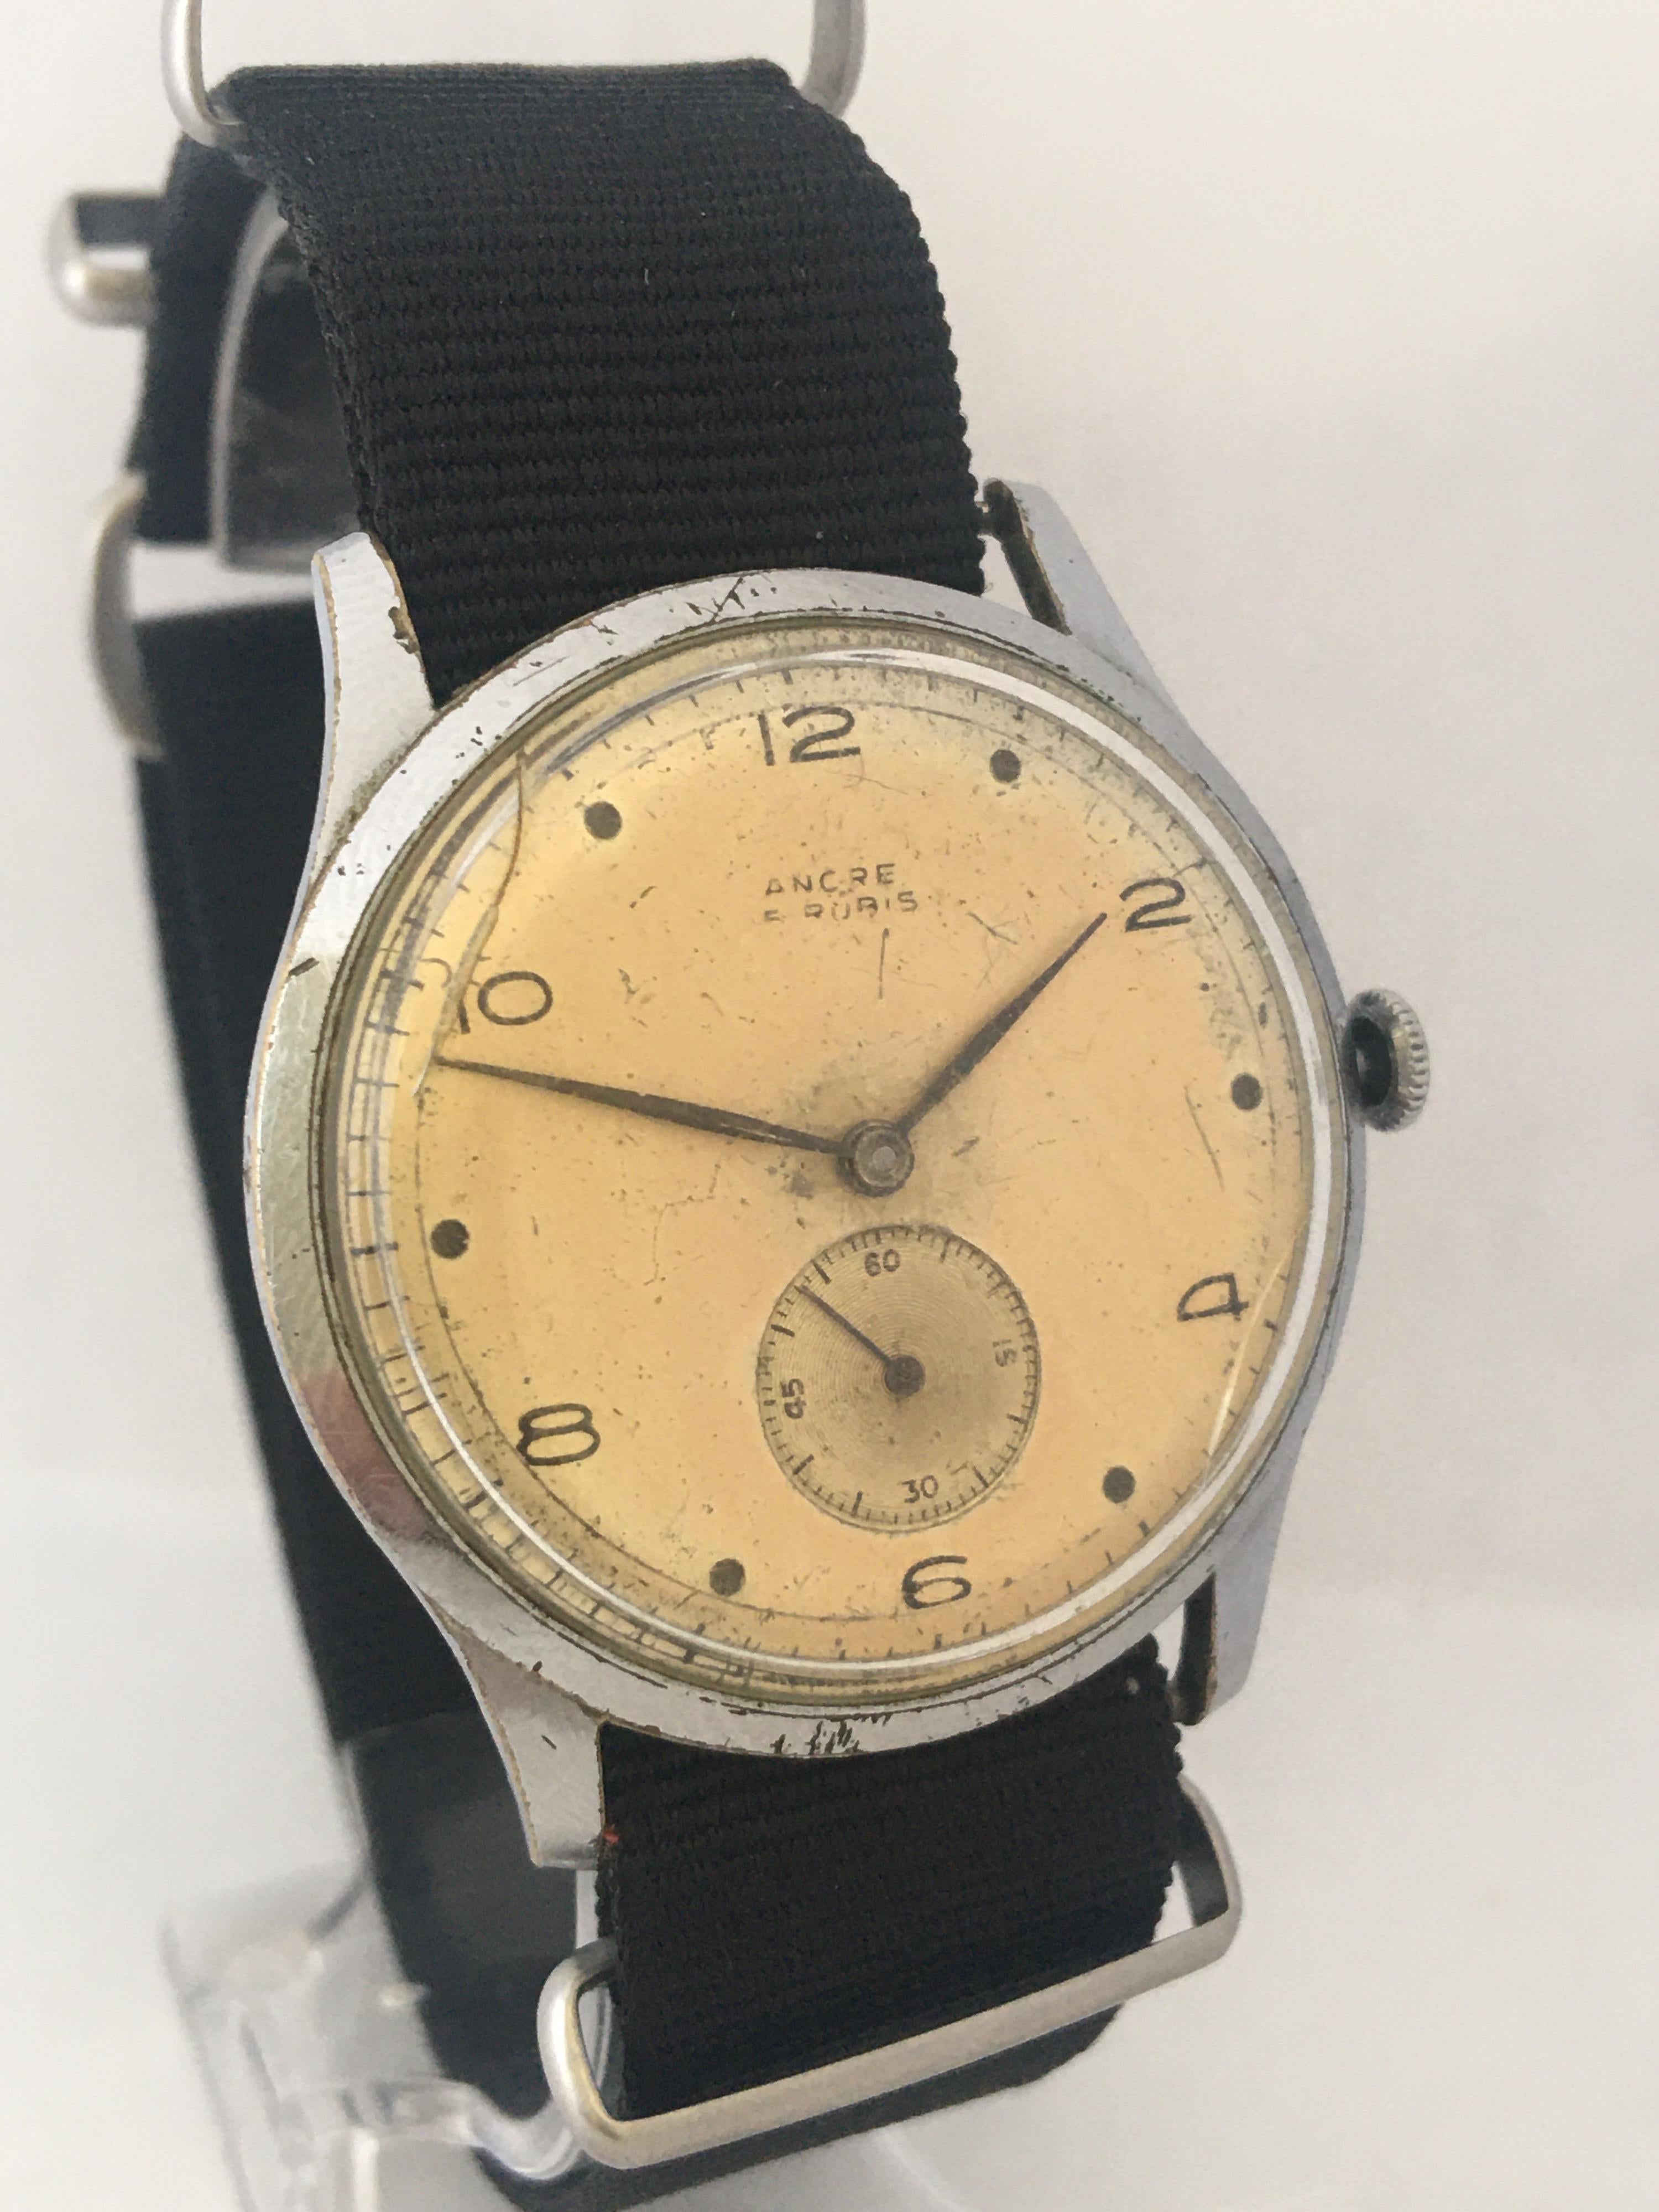 This pre-own vintage hand-winding Watch working and it is running well( keeps a good time) . There are visible signs of ageing and wear with cracks on the glass as shown. Light scratches and tarnishes on the watch case. the dial has aged. Fitted